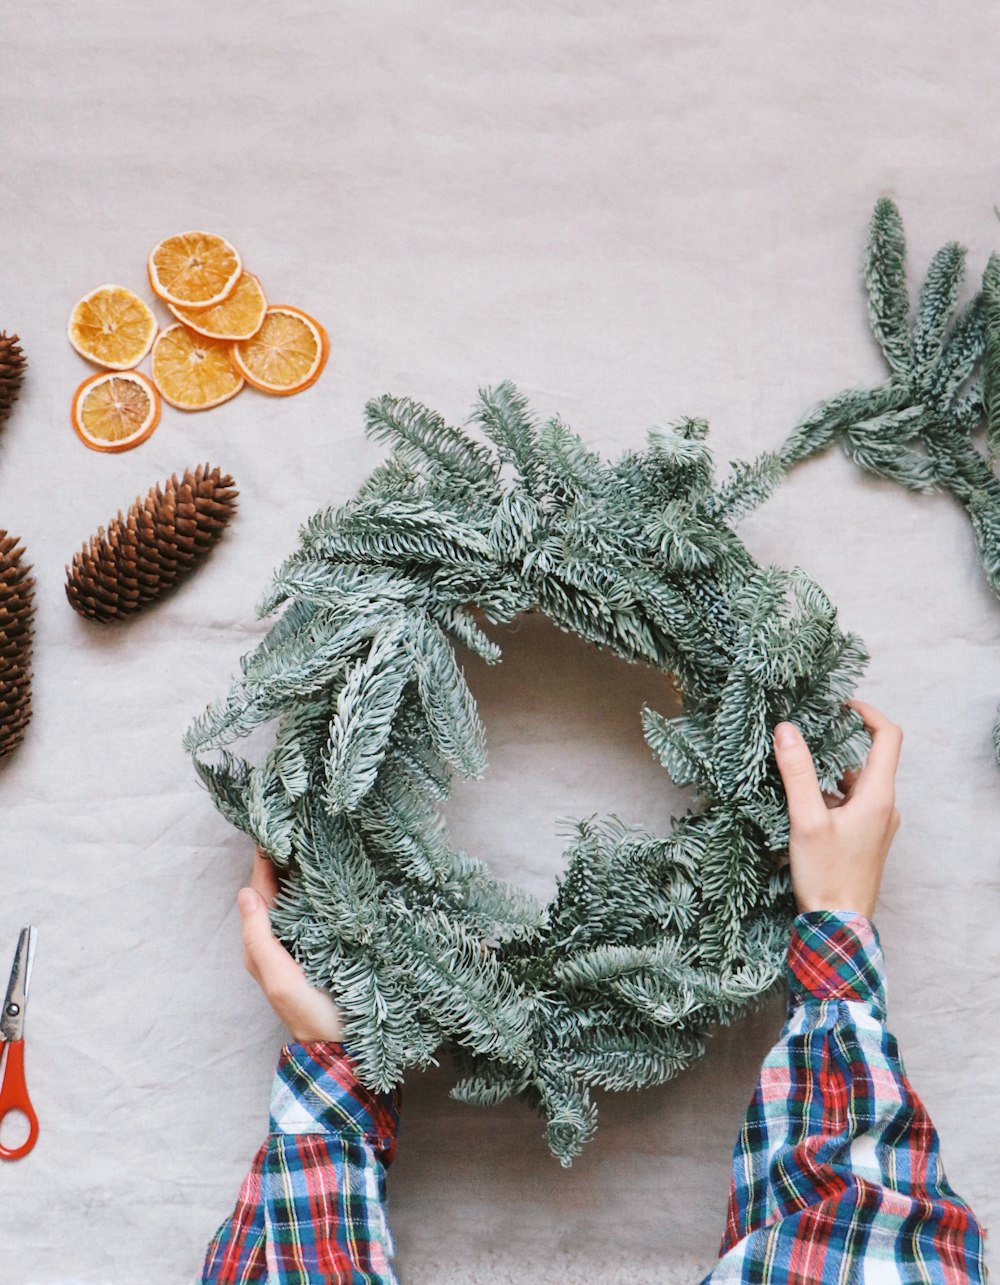 a person making a wreath with pine cones and oranges